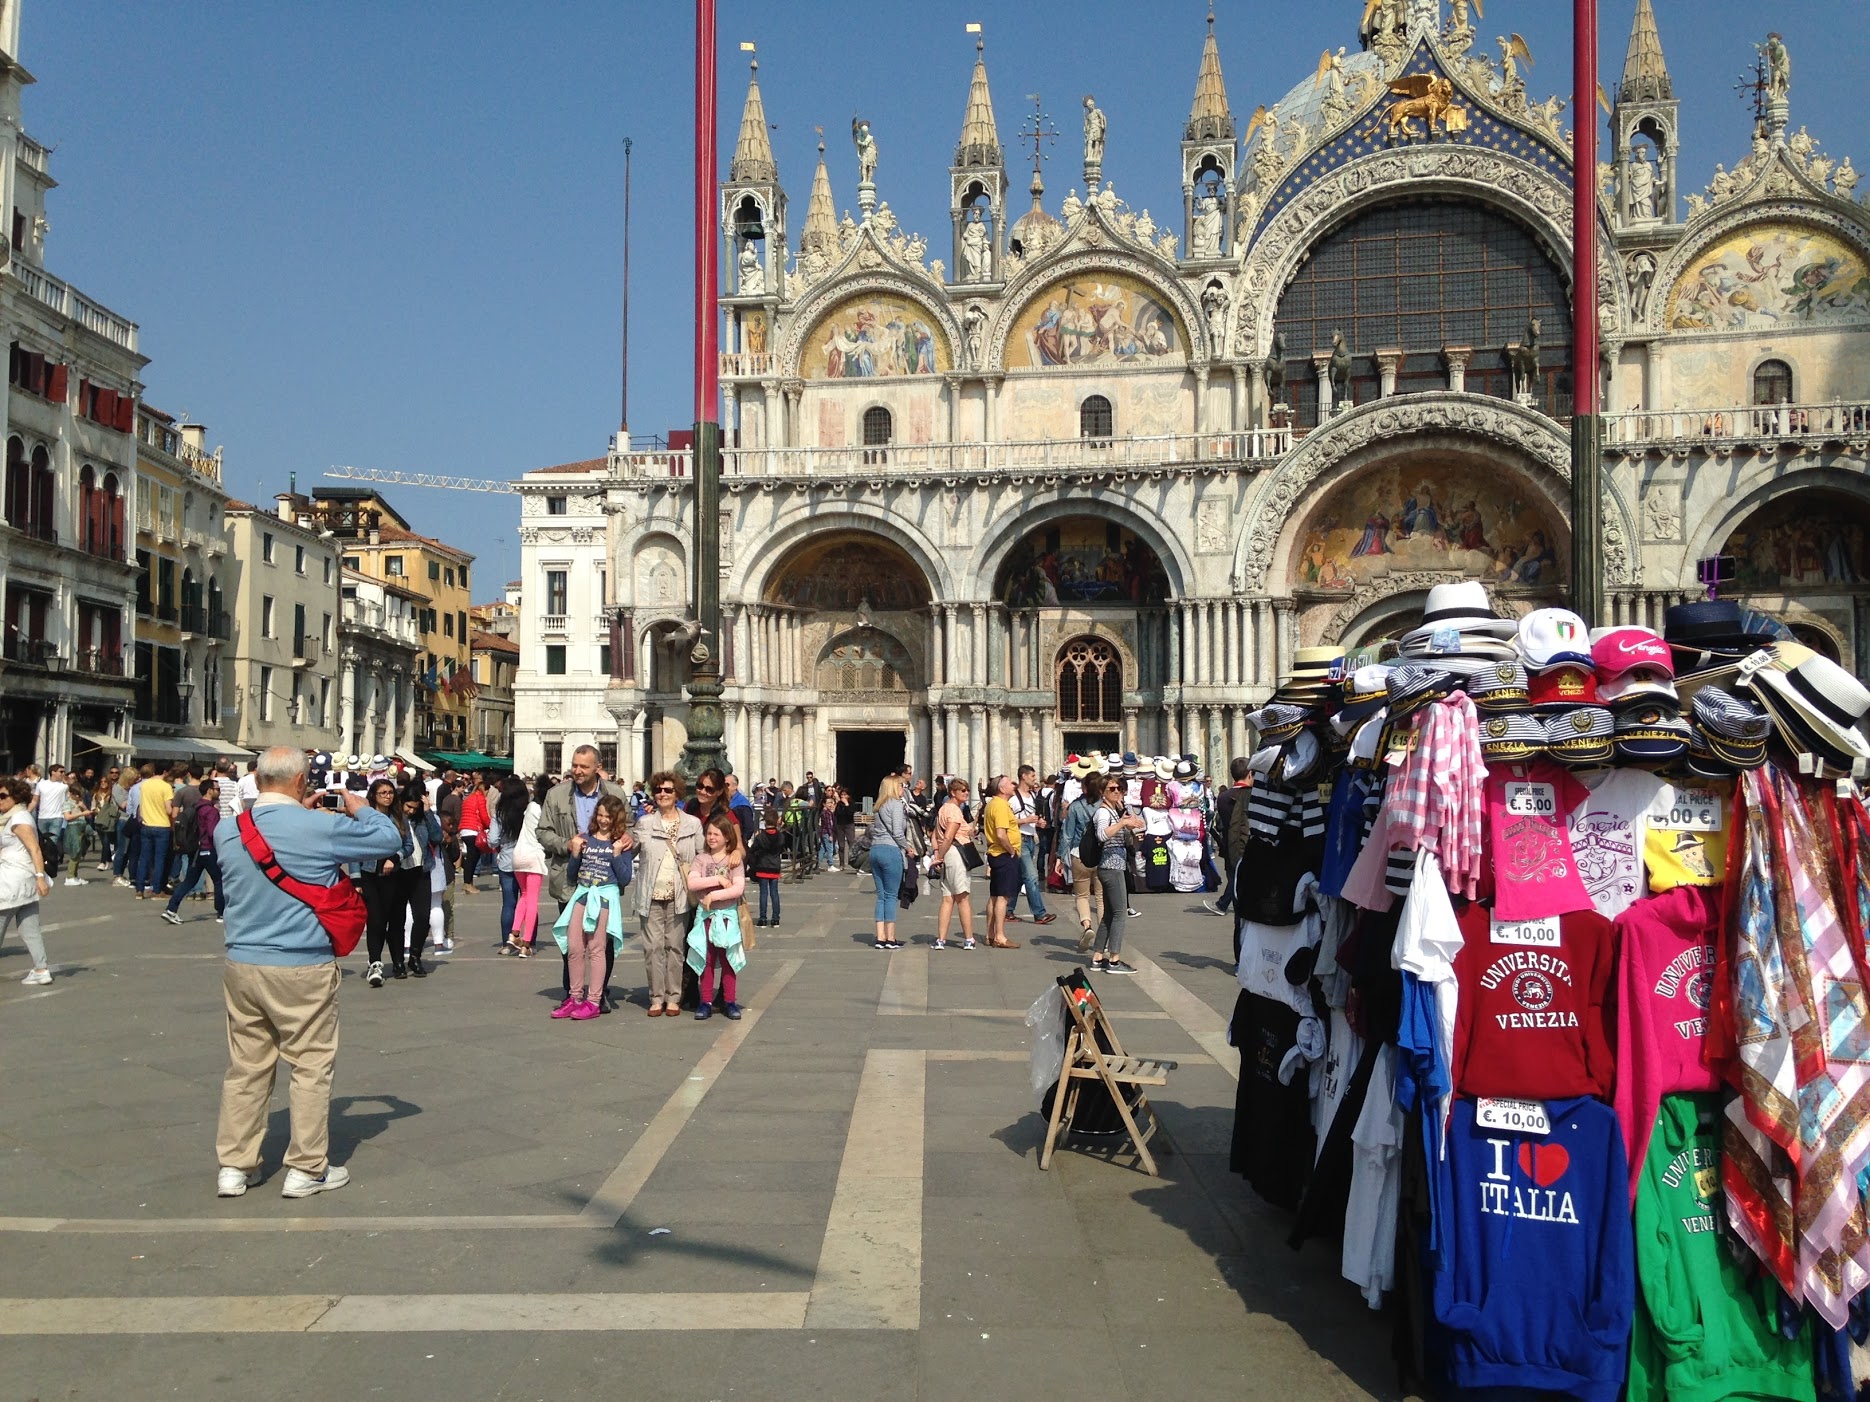 Public Space Tools goes to Venice!